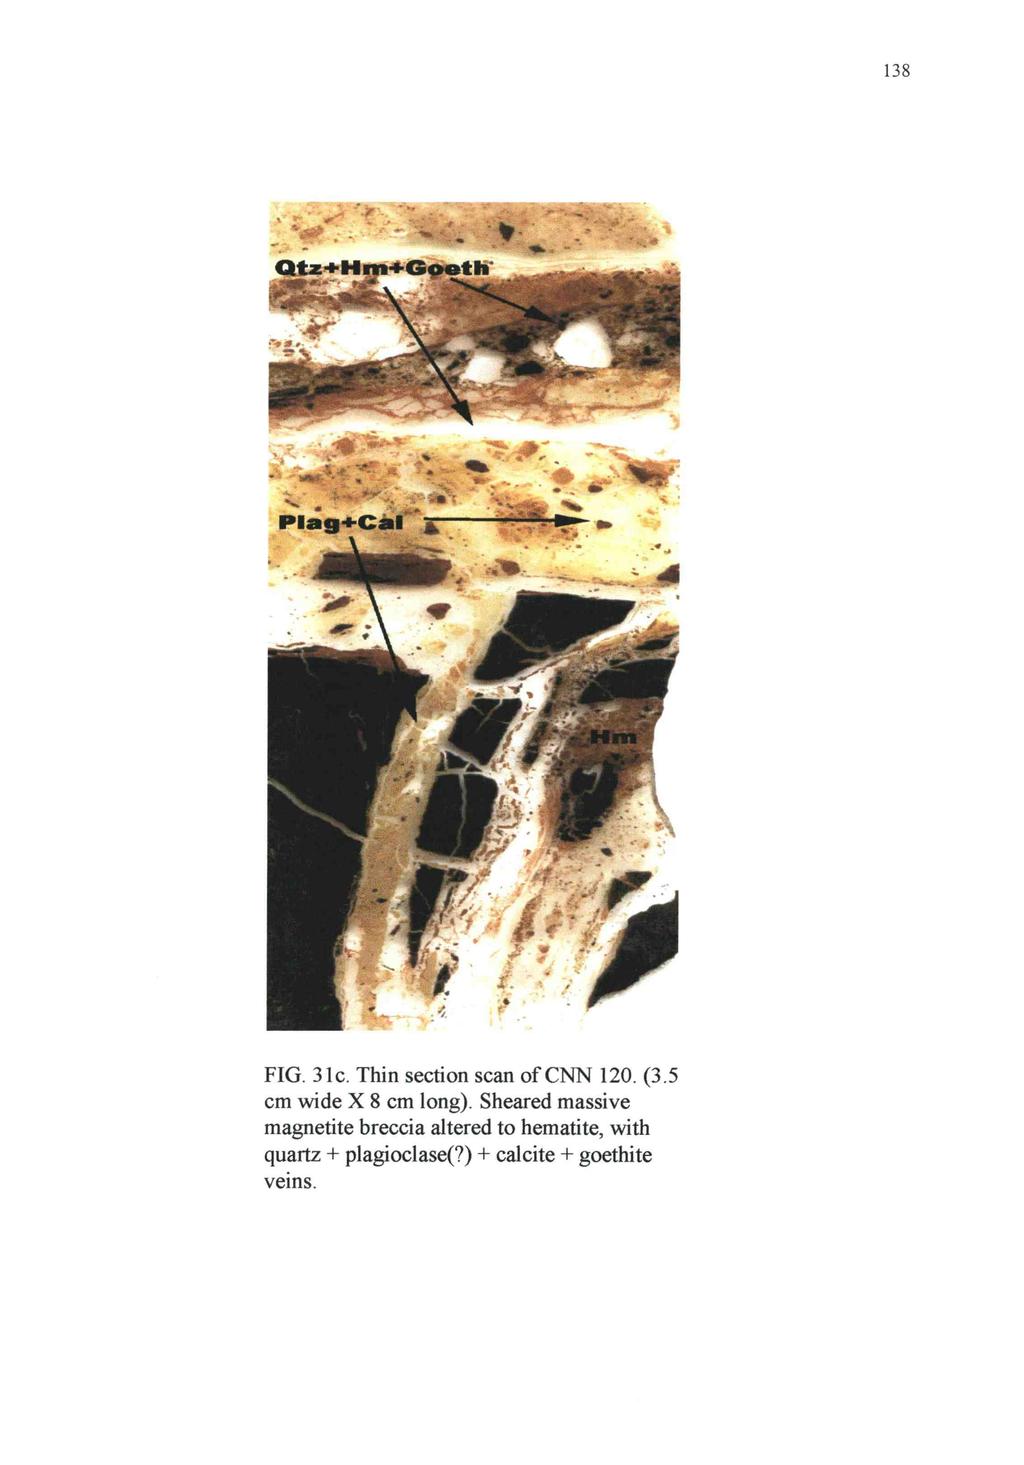 FIG. 31c. Thin section scan of CNN 120. (3.5 cm wide X 8 cm long).